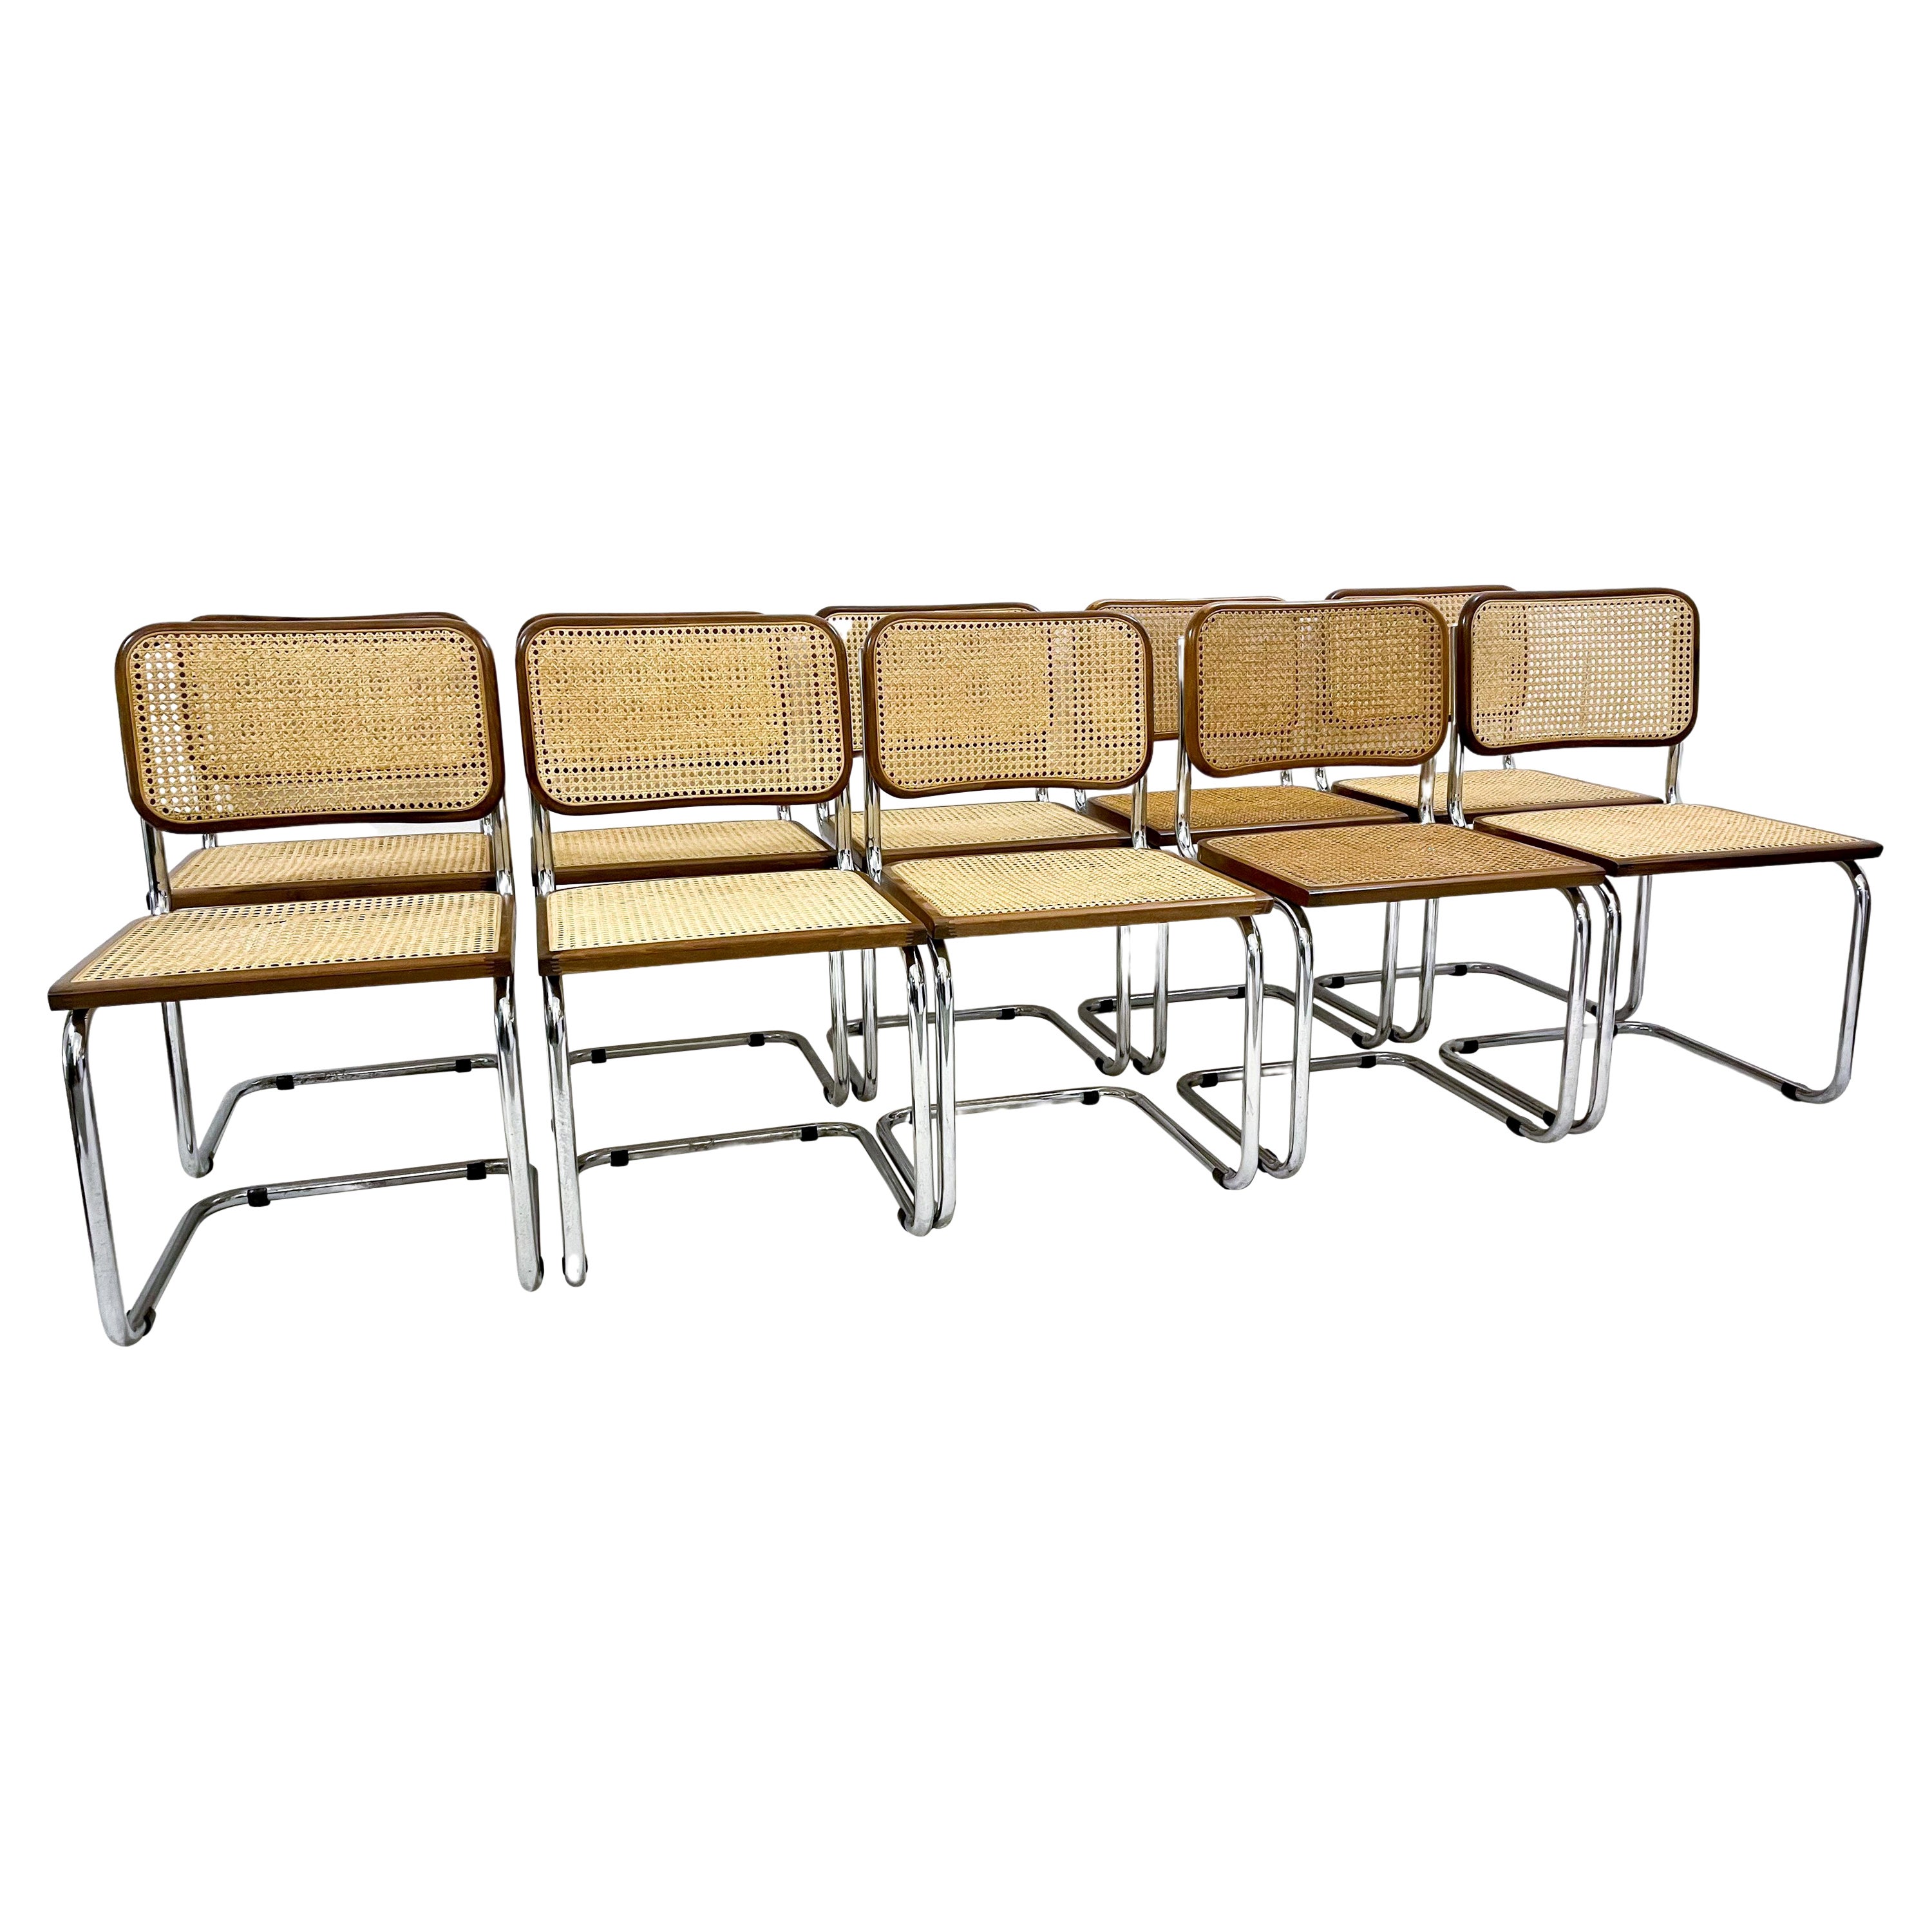 Set of 10 Chairs, Marcel Breuer Style, Wood and Canework Italy, 1995